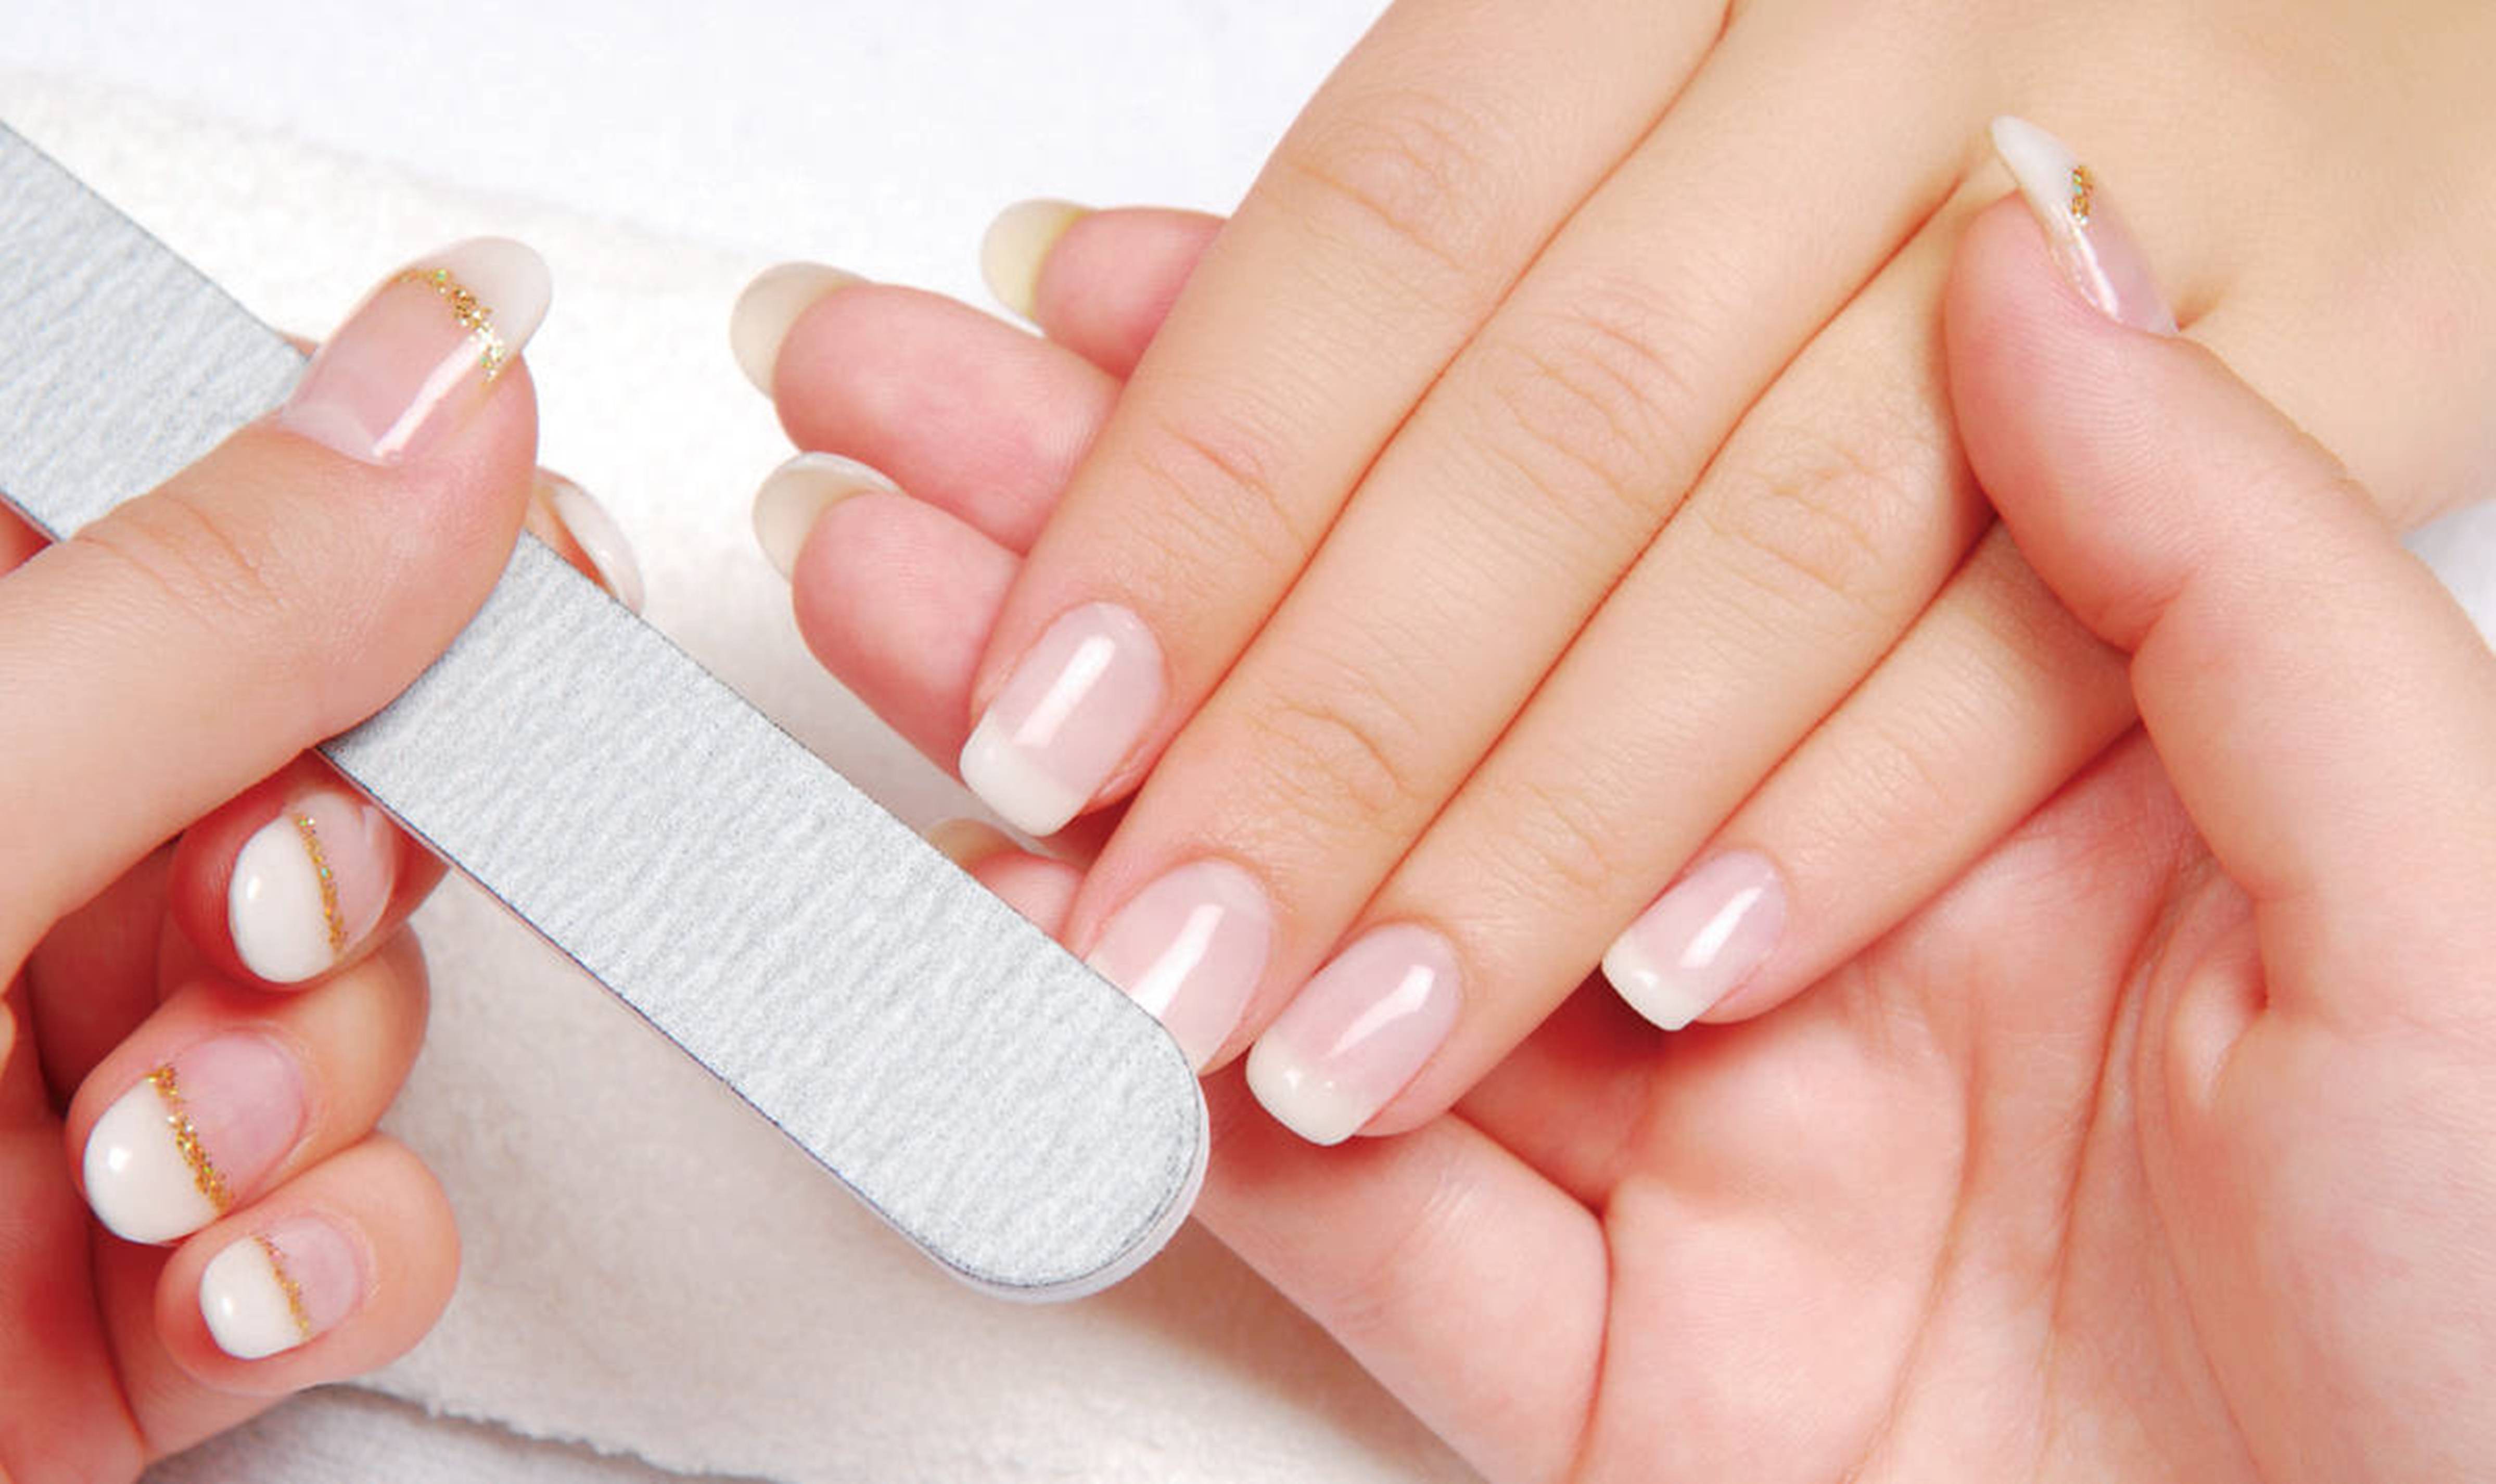 How to care for your nails? - Bindu Gopal Rao, Freelance Writer &  Photographer